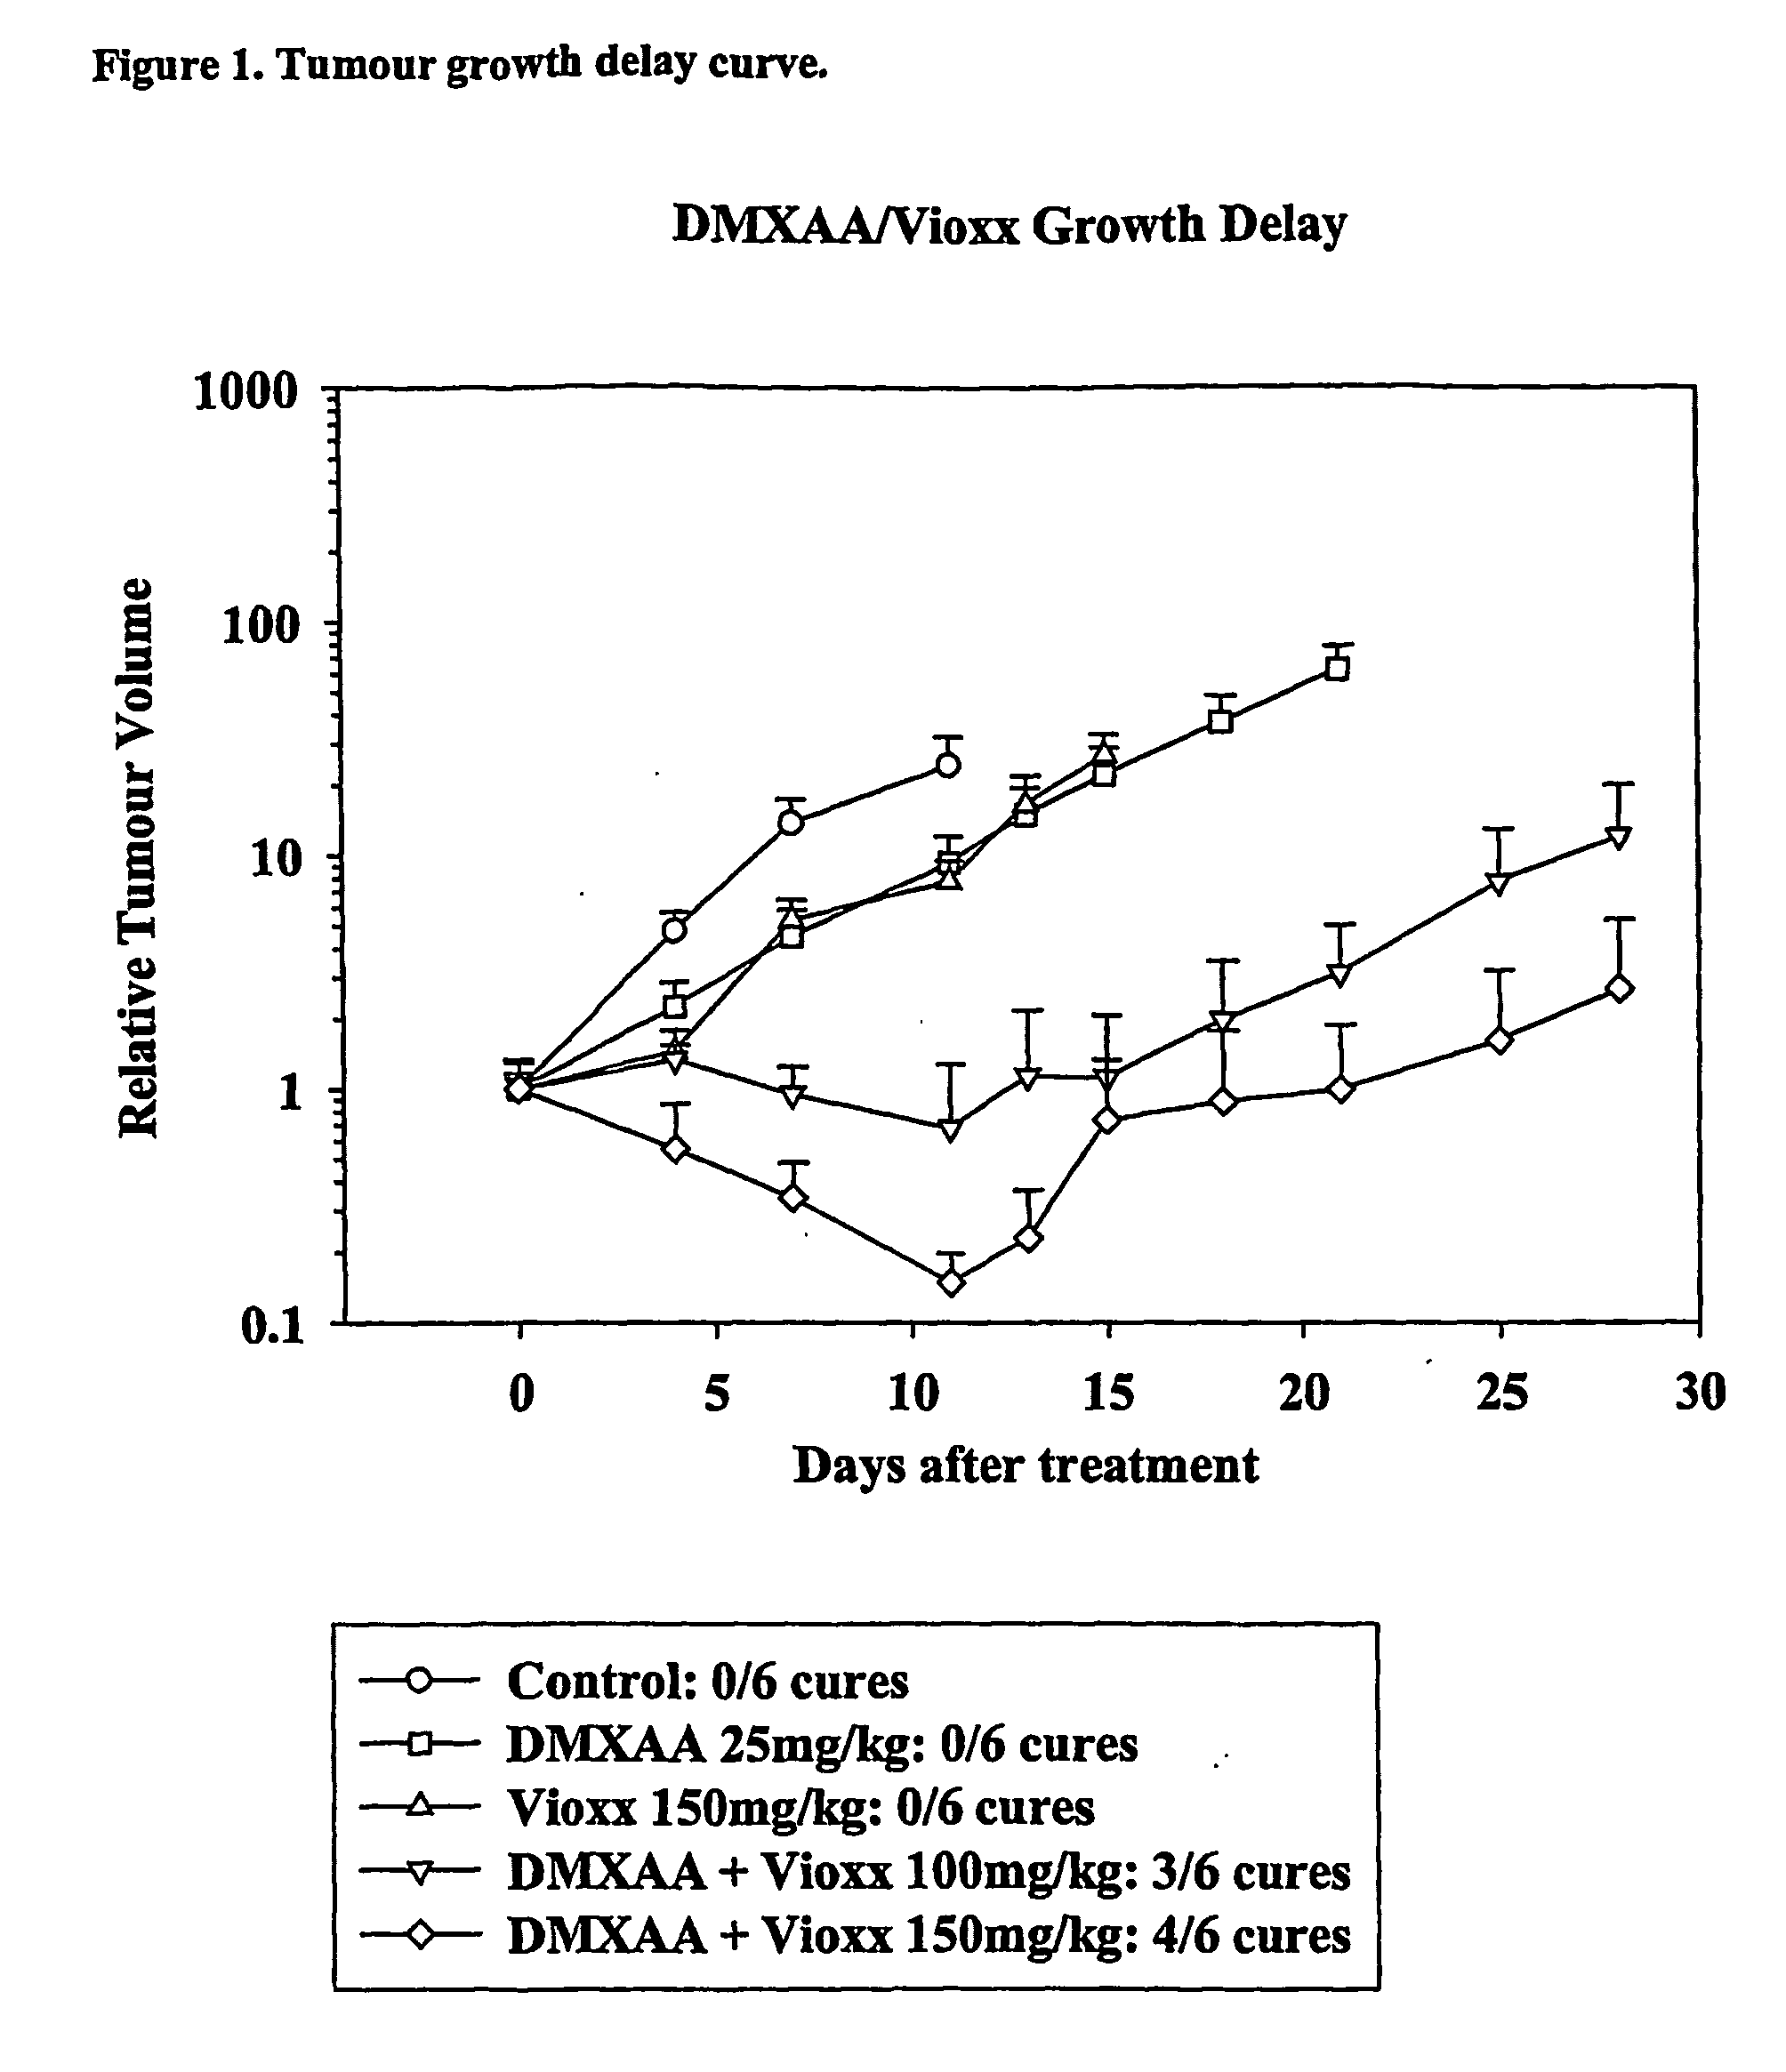 Anti cancer combinations comprising a cox-2 inhibitor